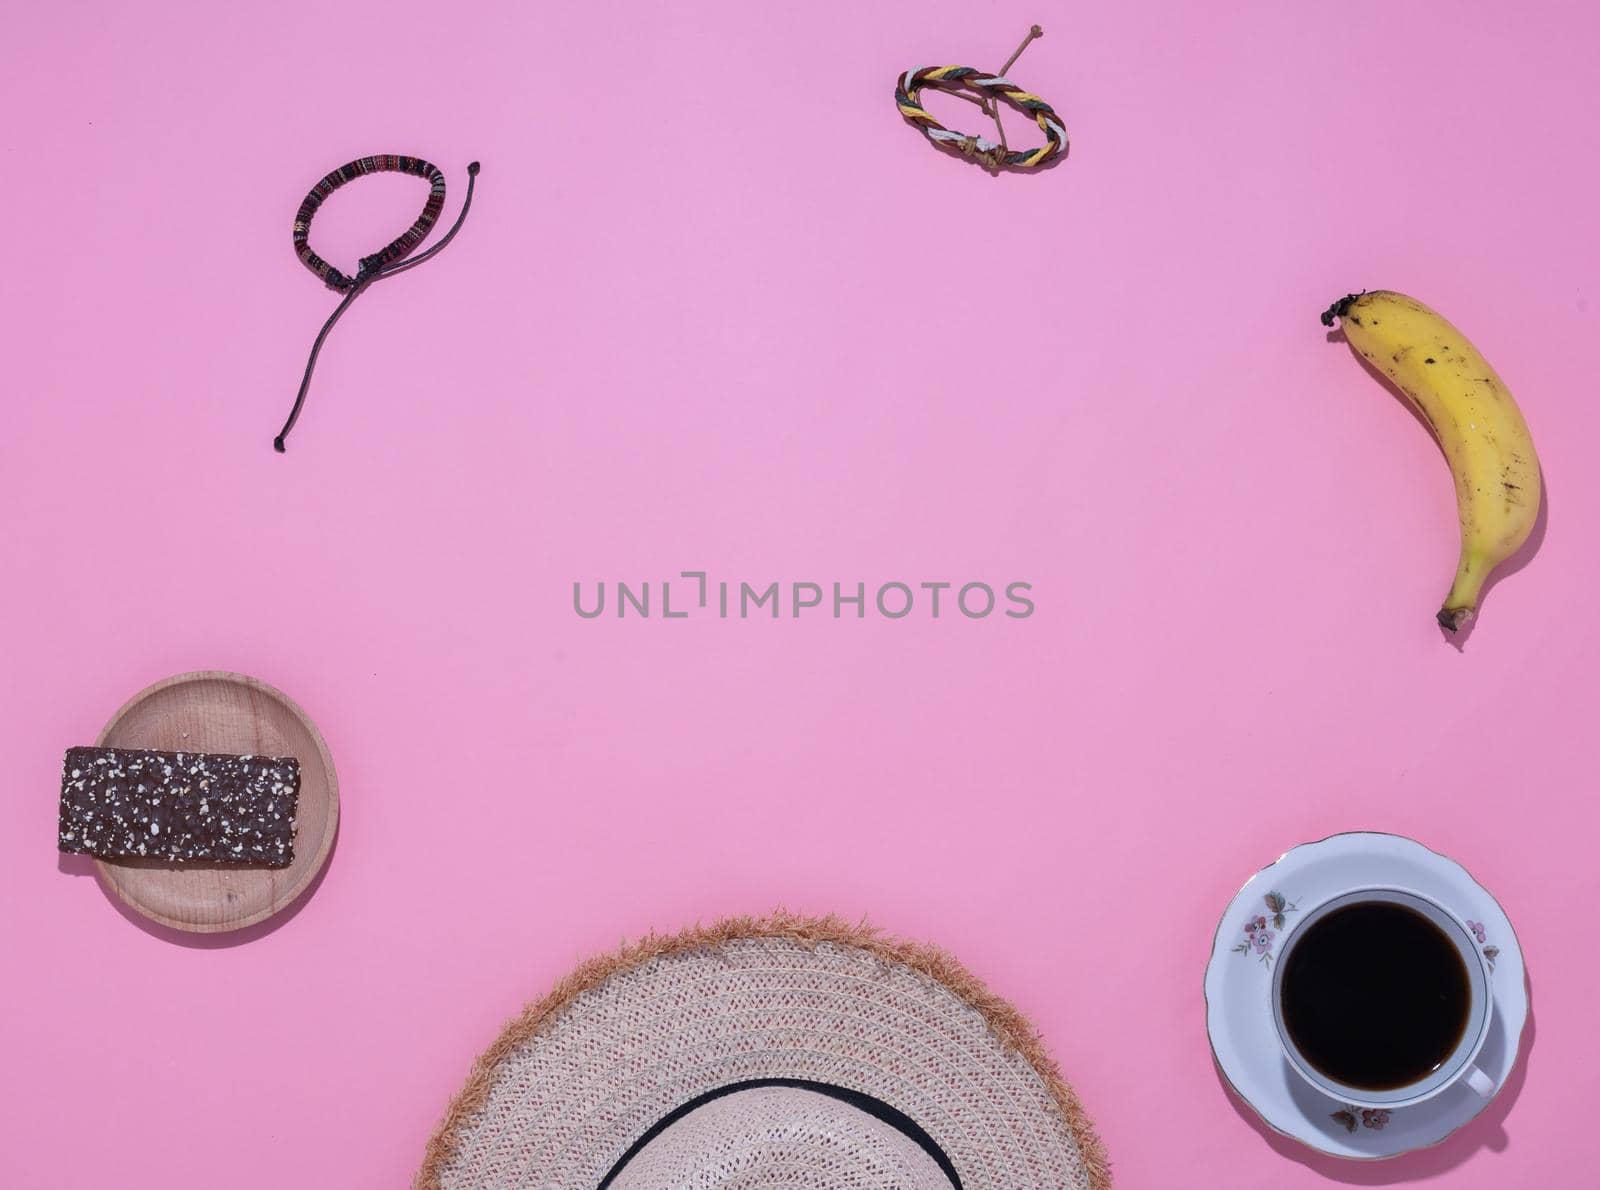 close-up of travelers' personal belongings pink background by ISRAFOTO